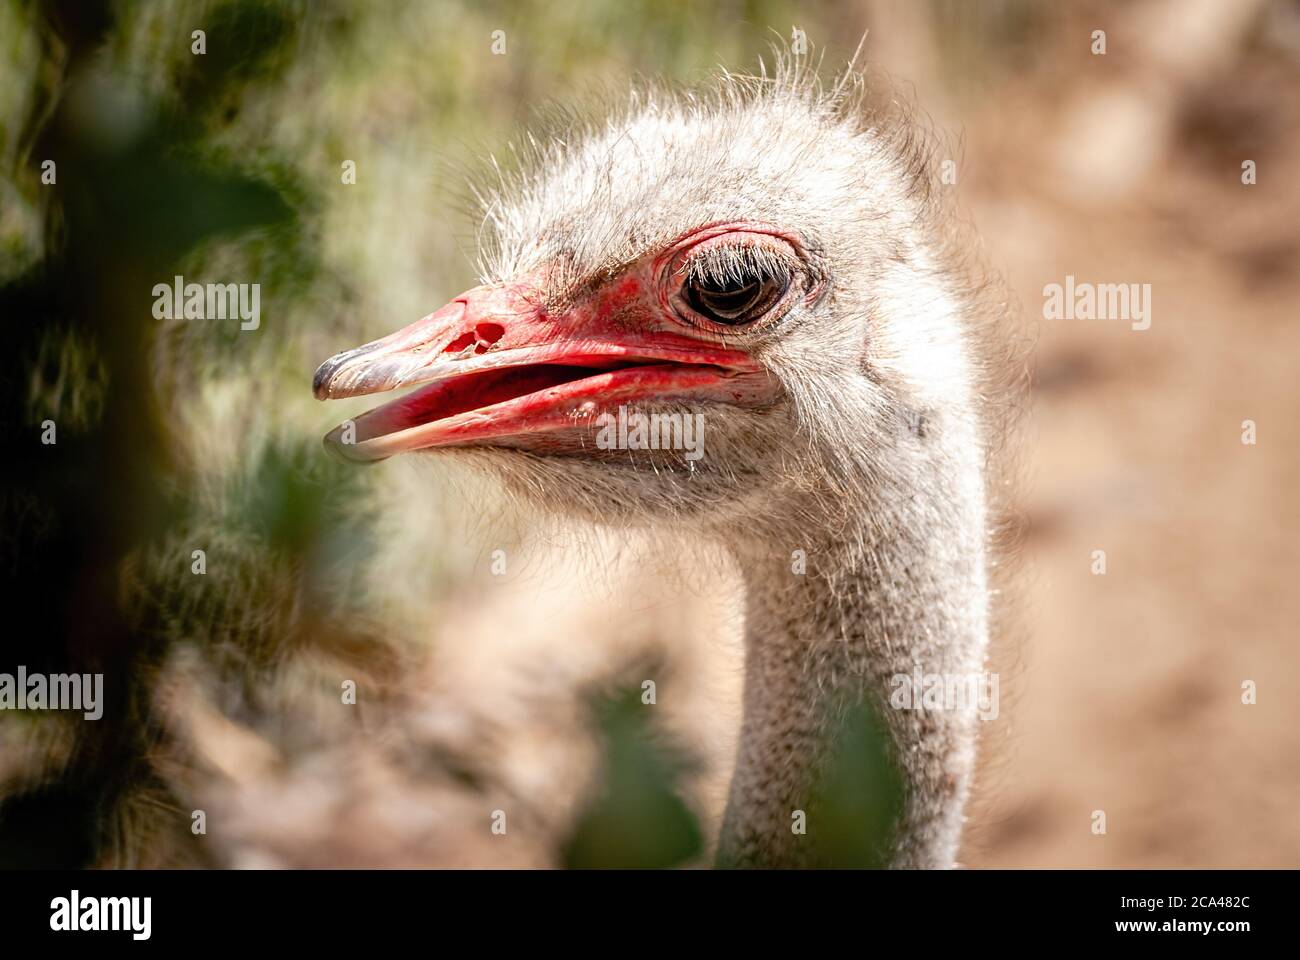 The common ostrich (Struthio camelus), or simply ostrich, is a species of large flightless bird native to certain large areas of Africa. Stock Photo